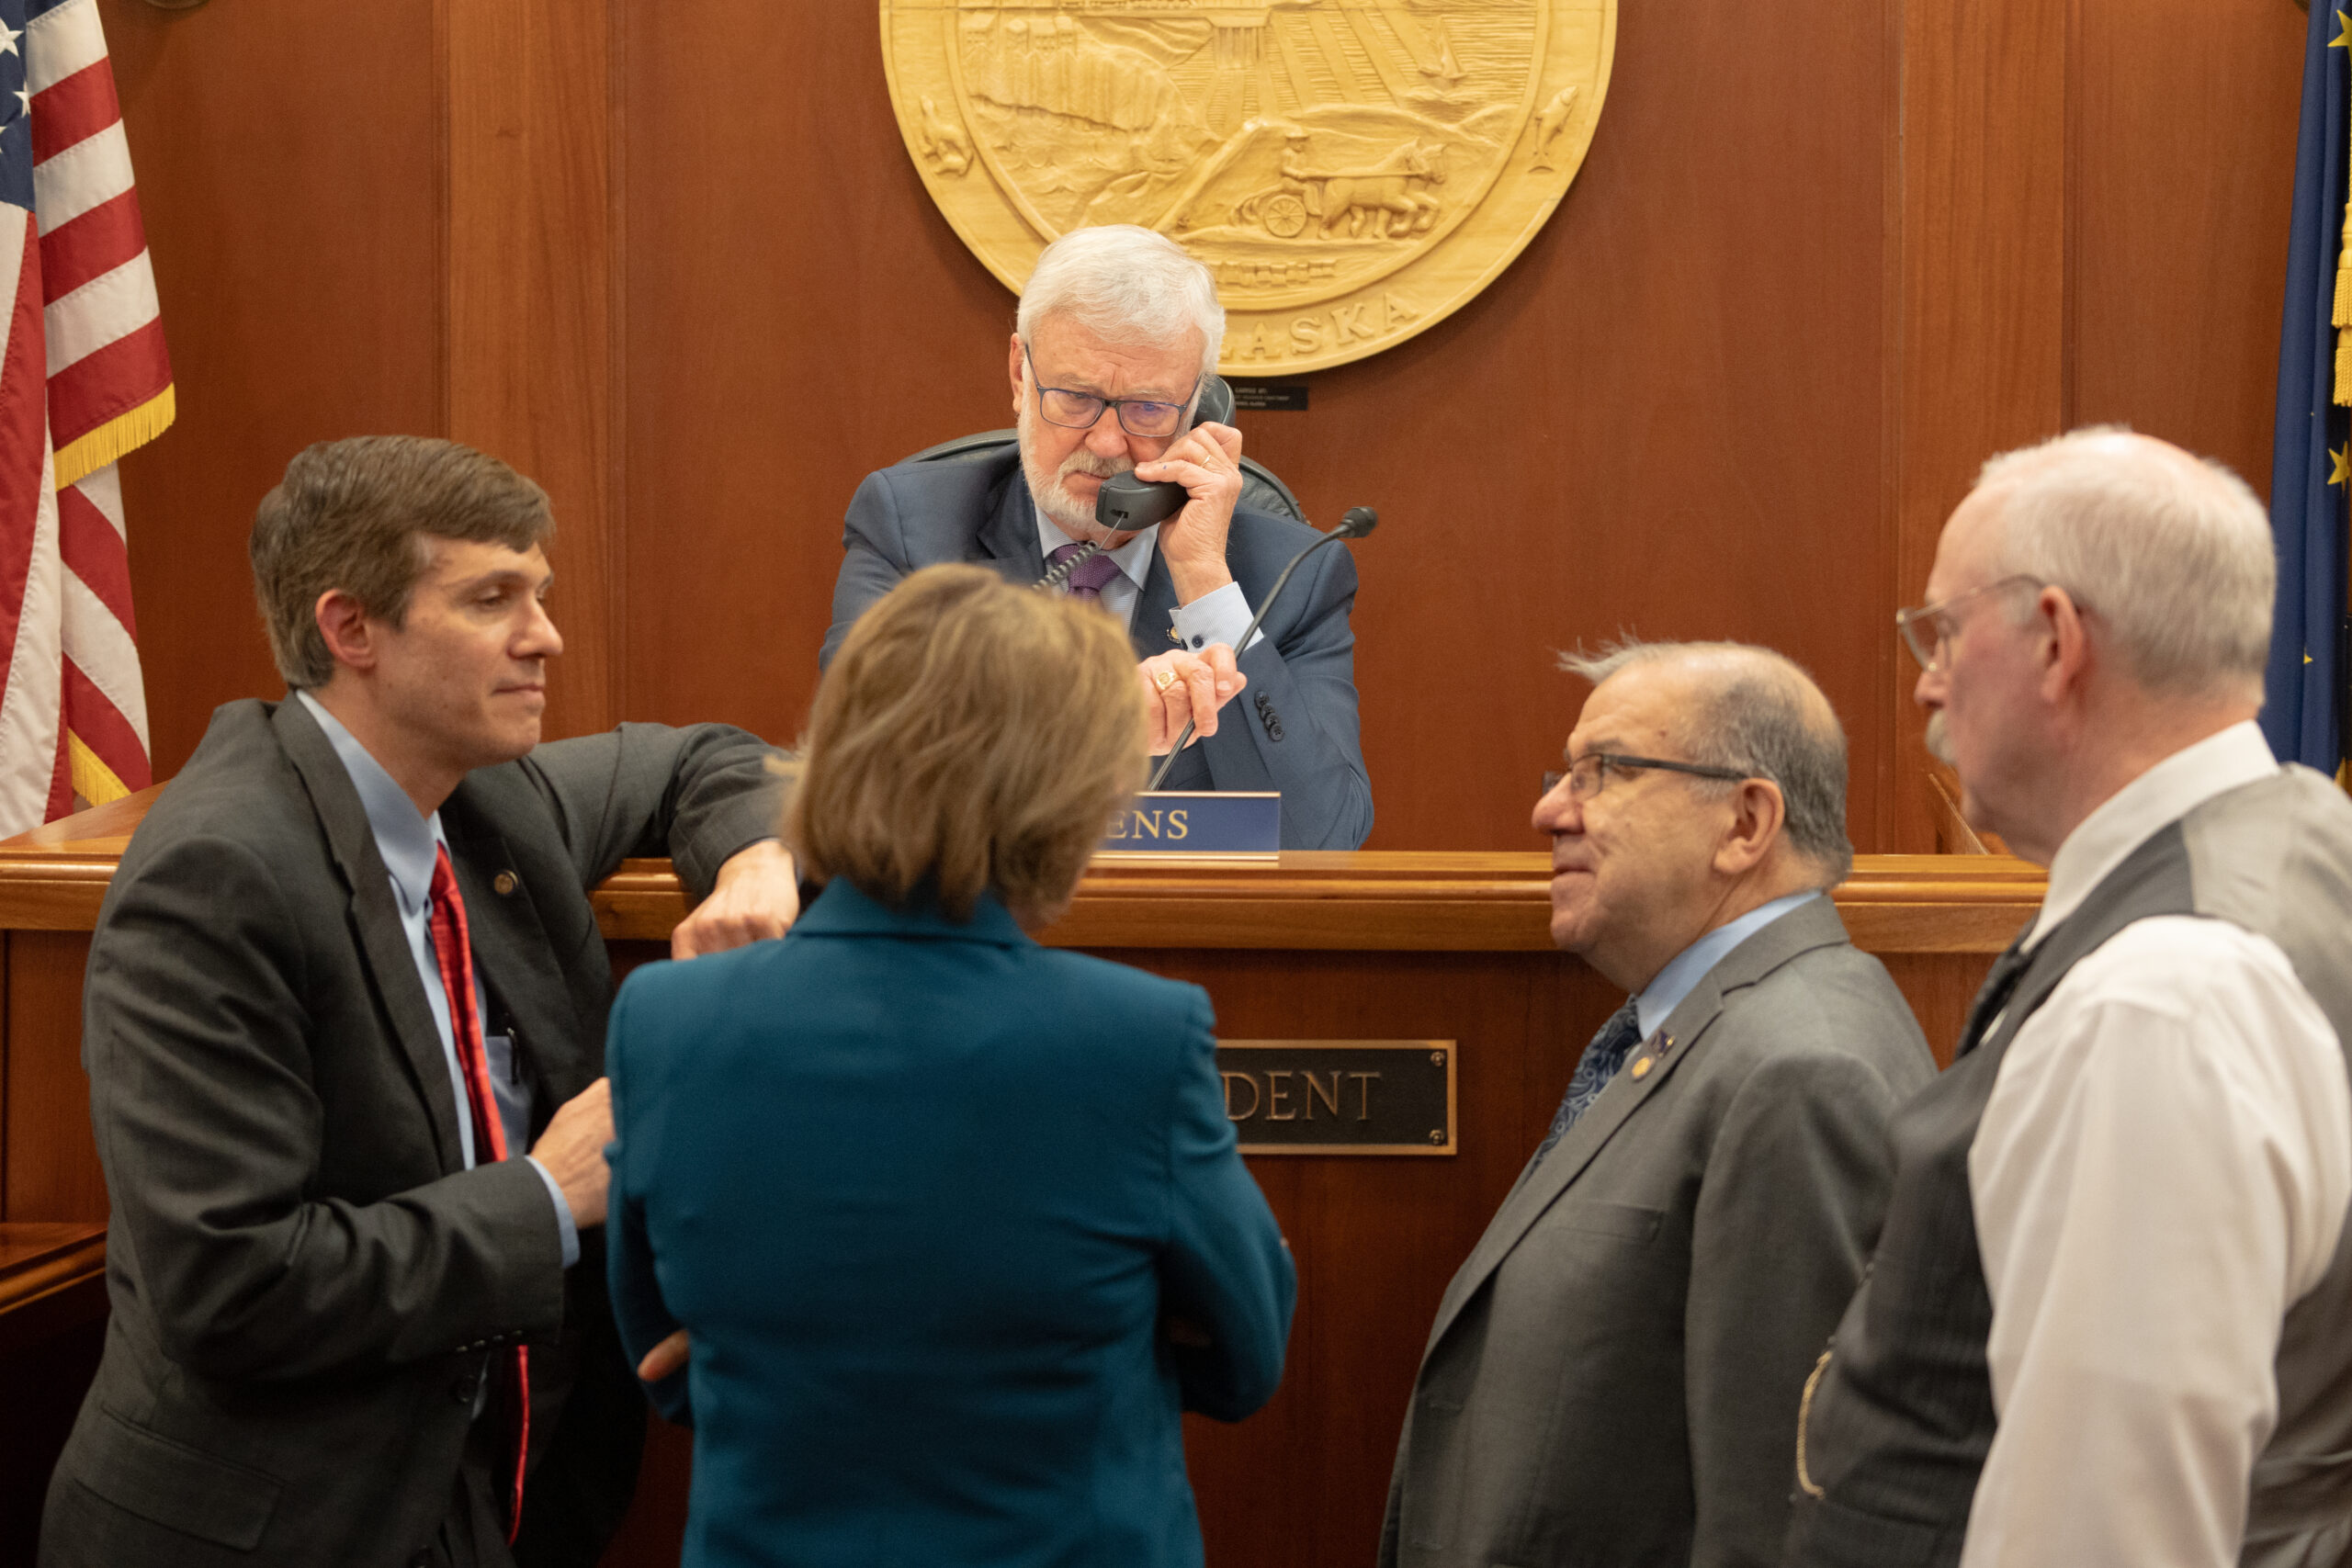 Bills aimed at reducing energy costs, boosting Cook Inlet gas and carbon storage advance in Legislature's final days